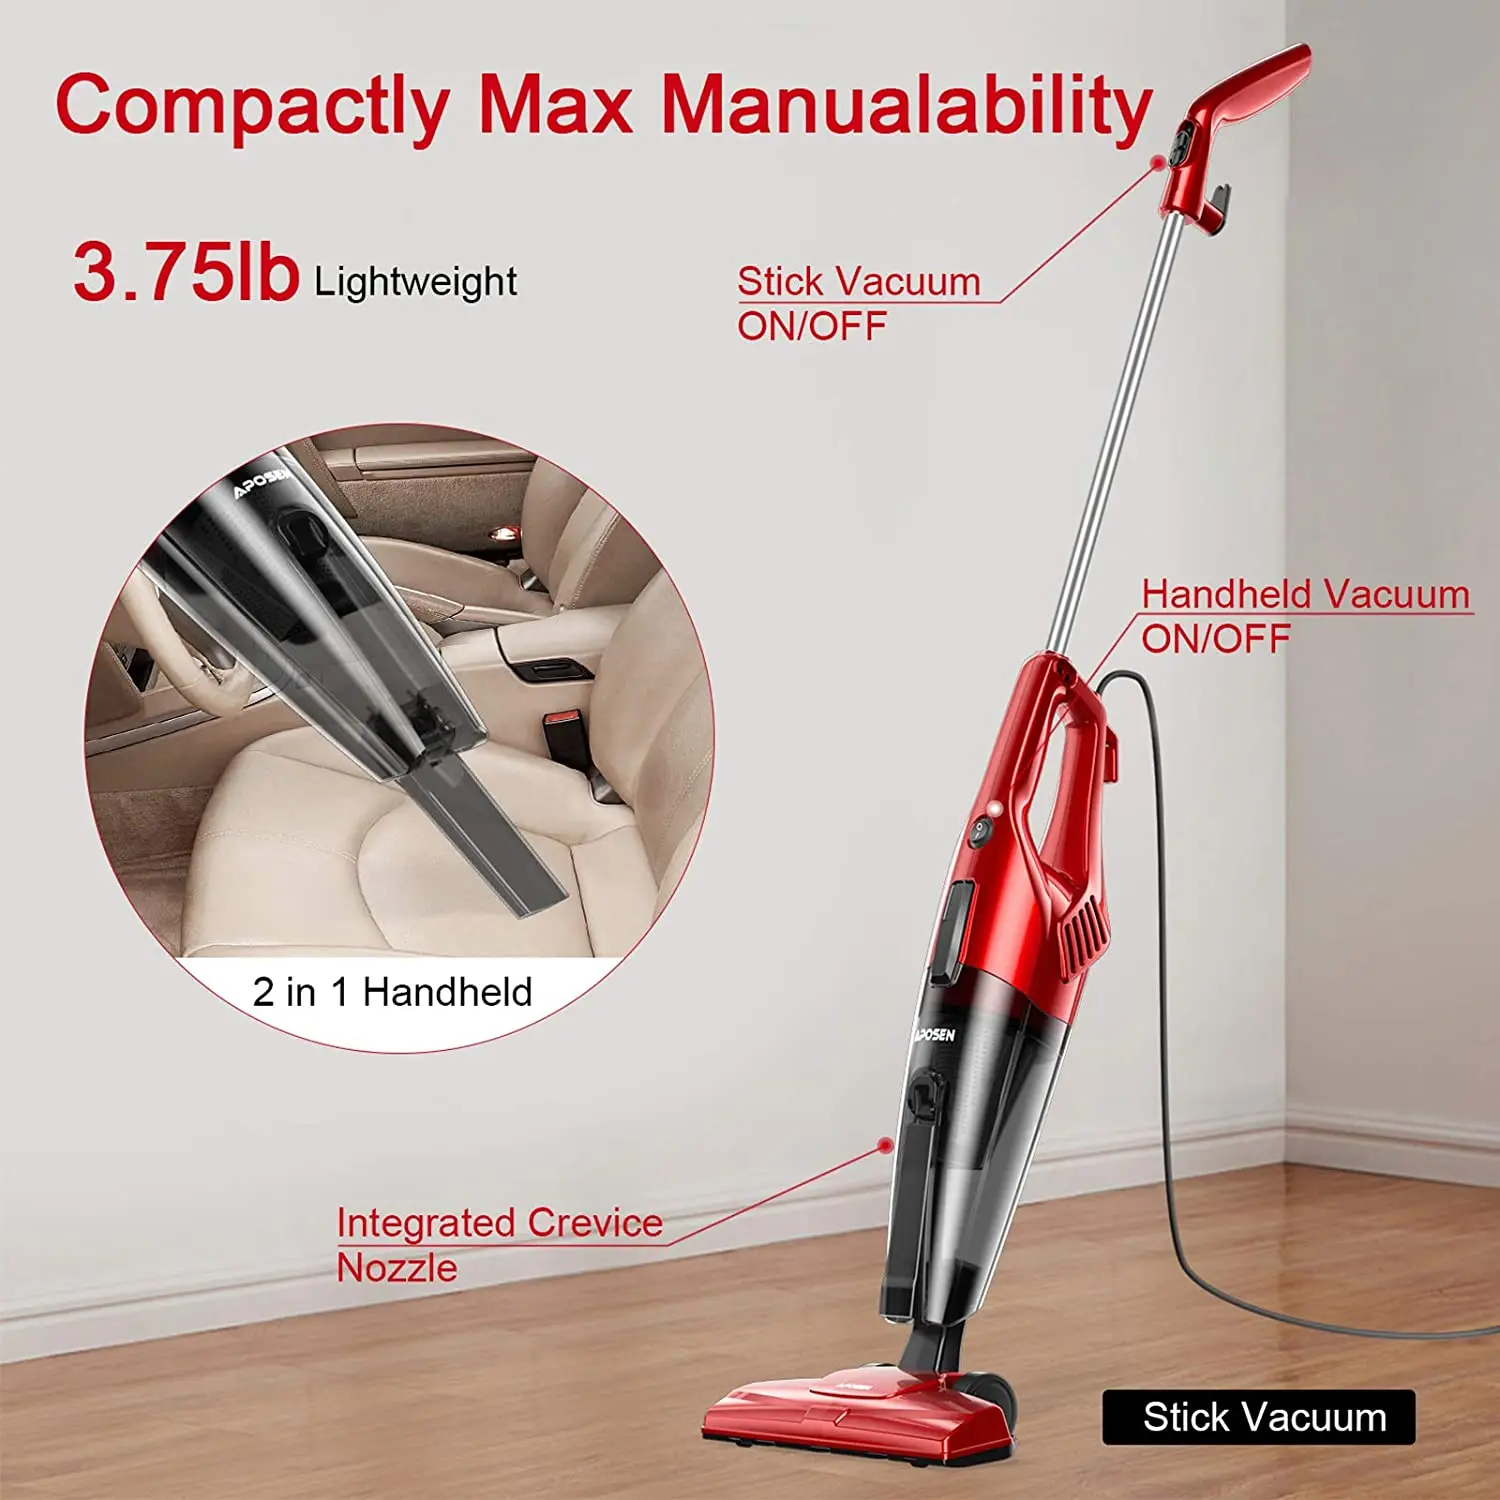 https://ae01.alicdn.com/kf/He3508a1345fa4511b2e194196d537cabv/APOSEN-Cord-Vacuum-Cleaner-15KPa-600W-Powerful-Suction-with-Foldable-Design-Washable-HEPA-Filter-Lightweight-Quiet.jpg